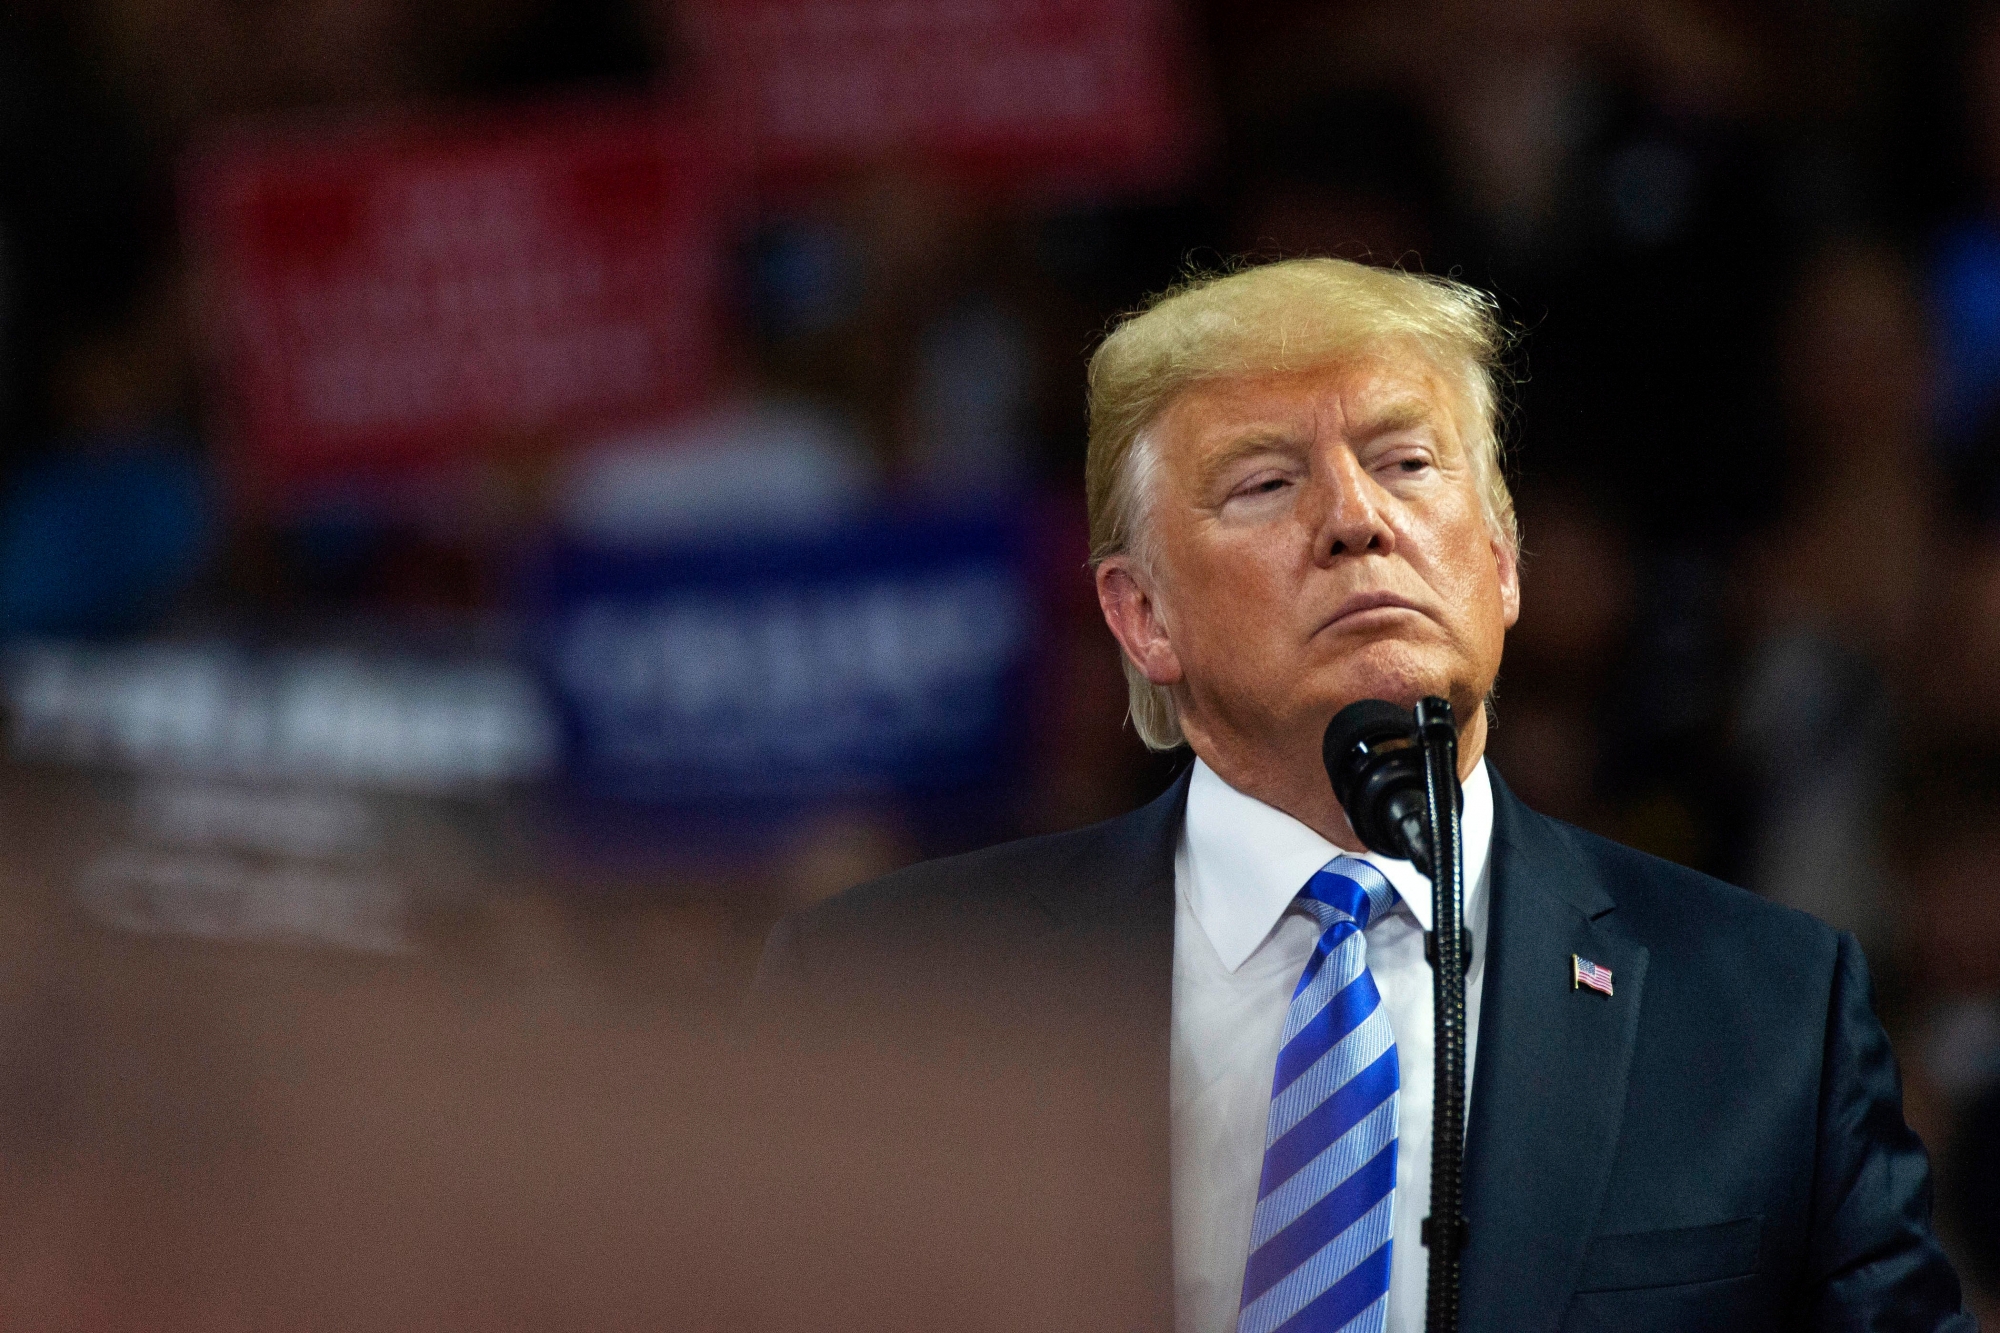 President Donald Trump takes the stage at a rally in support of the Senate candidacy of West Virginia's Attorney General Patrick Morrisey, Tuesday, Aug. 21, 2018, at the Charleston Civic Center in Charleston, W.Va. (Craig Hudson/Charleston Gazette-Mail via AP) APTOPIX Trump